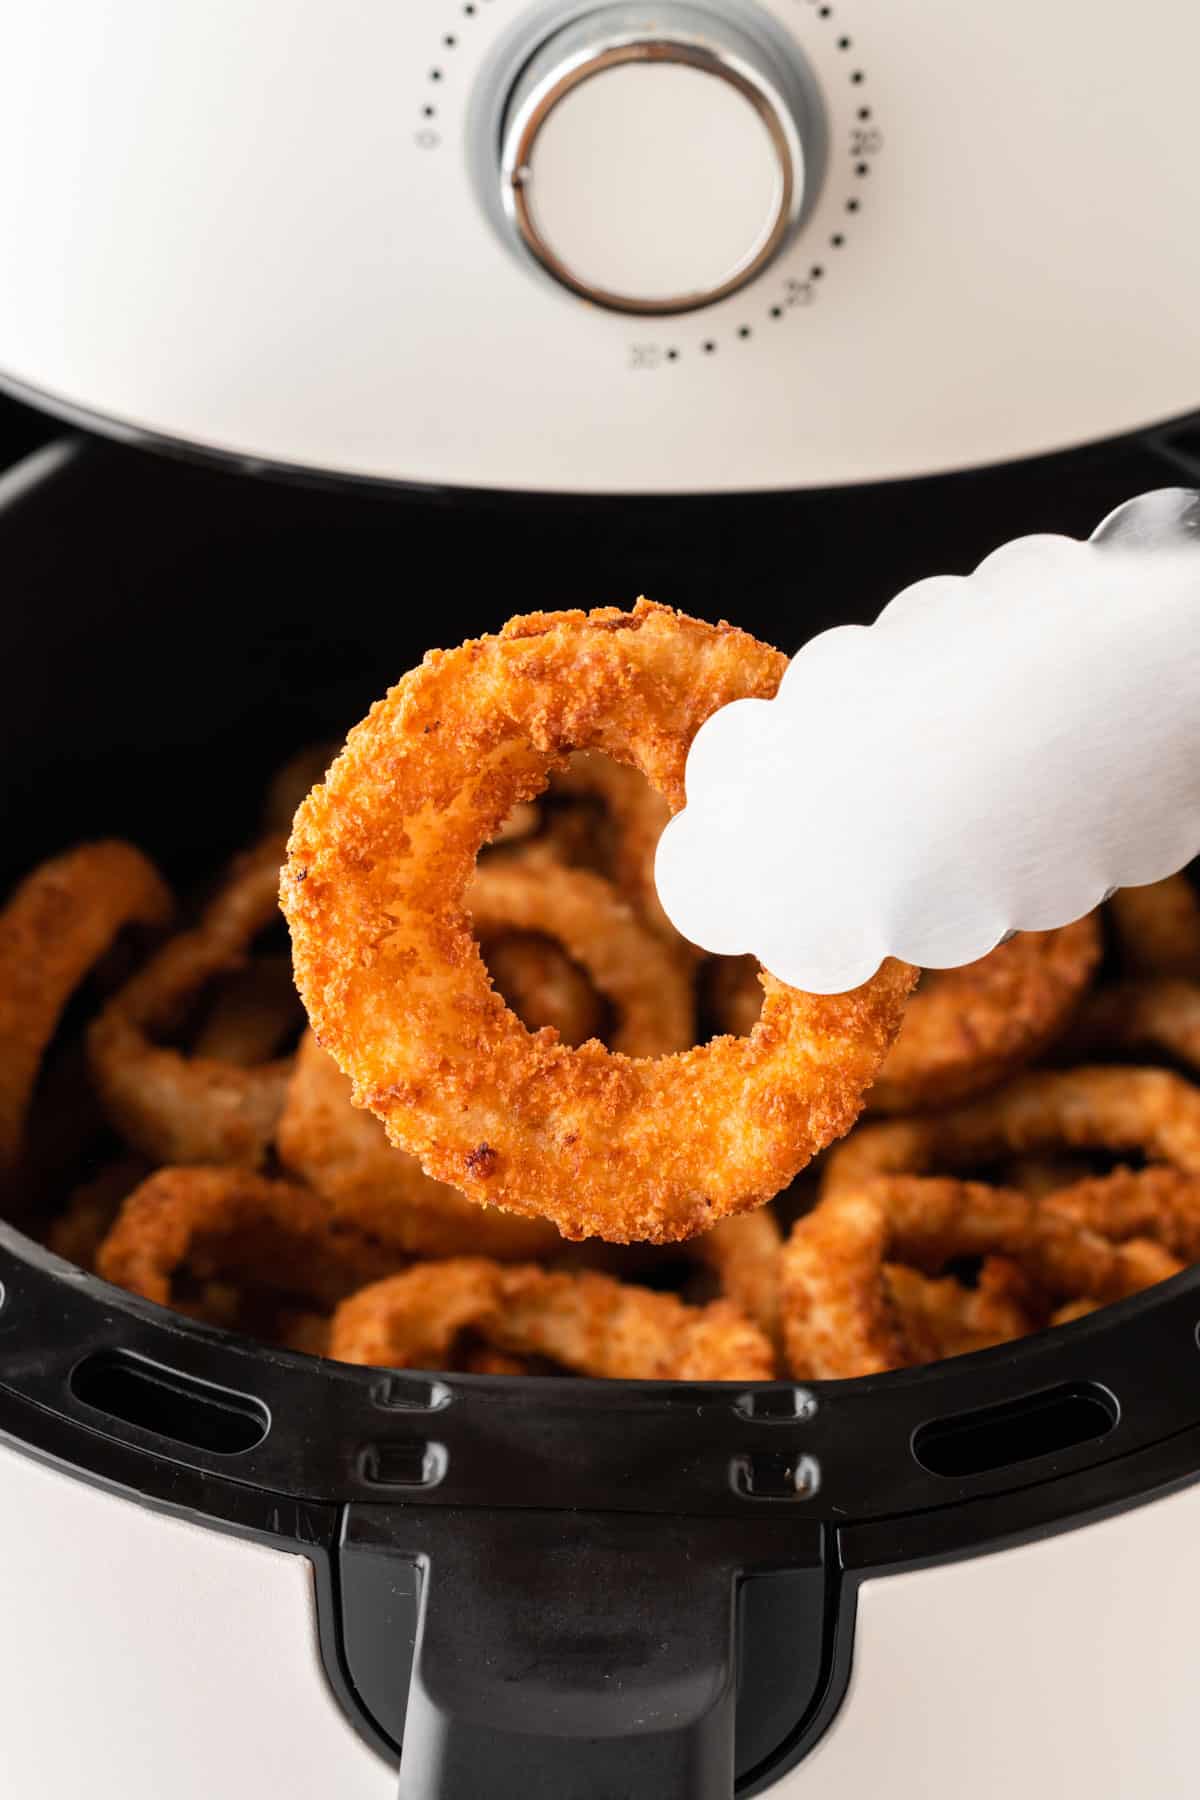 taking an onion ring from the air fryer